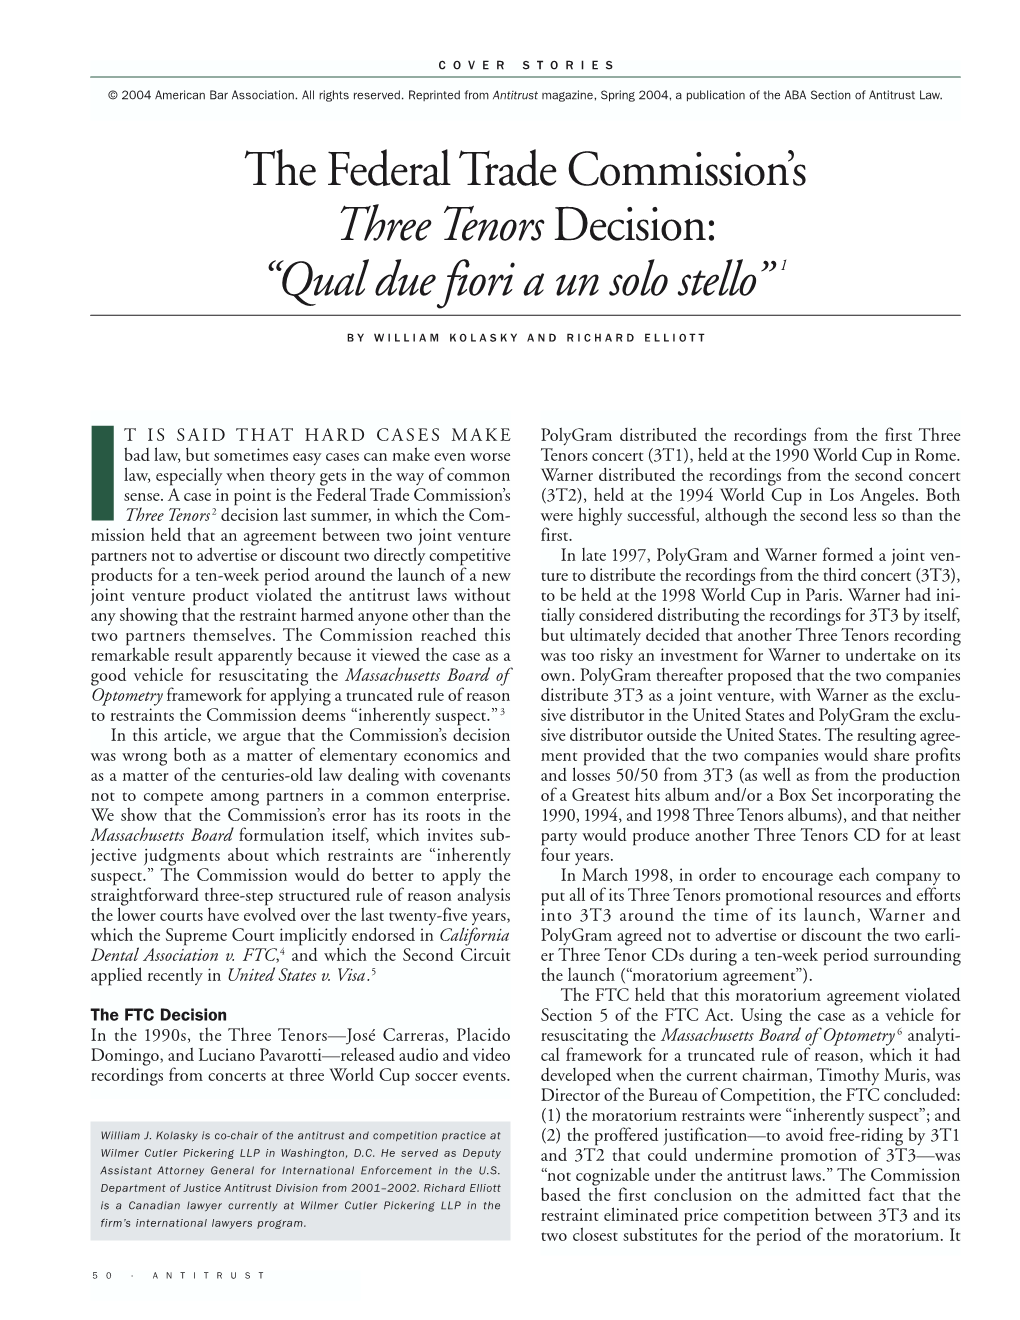 The Federal Trade Commission's Three Tenorsdecision